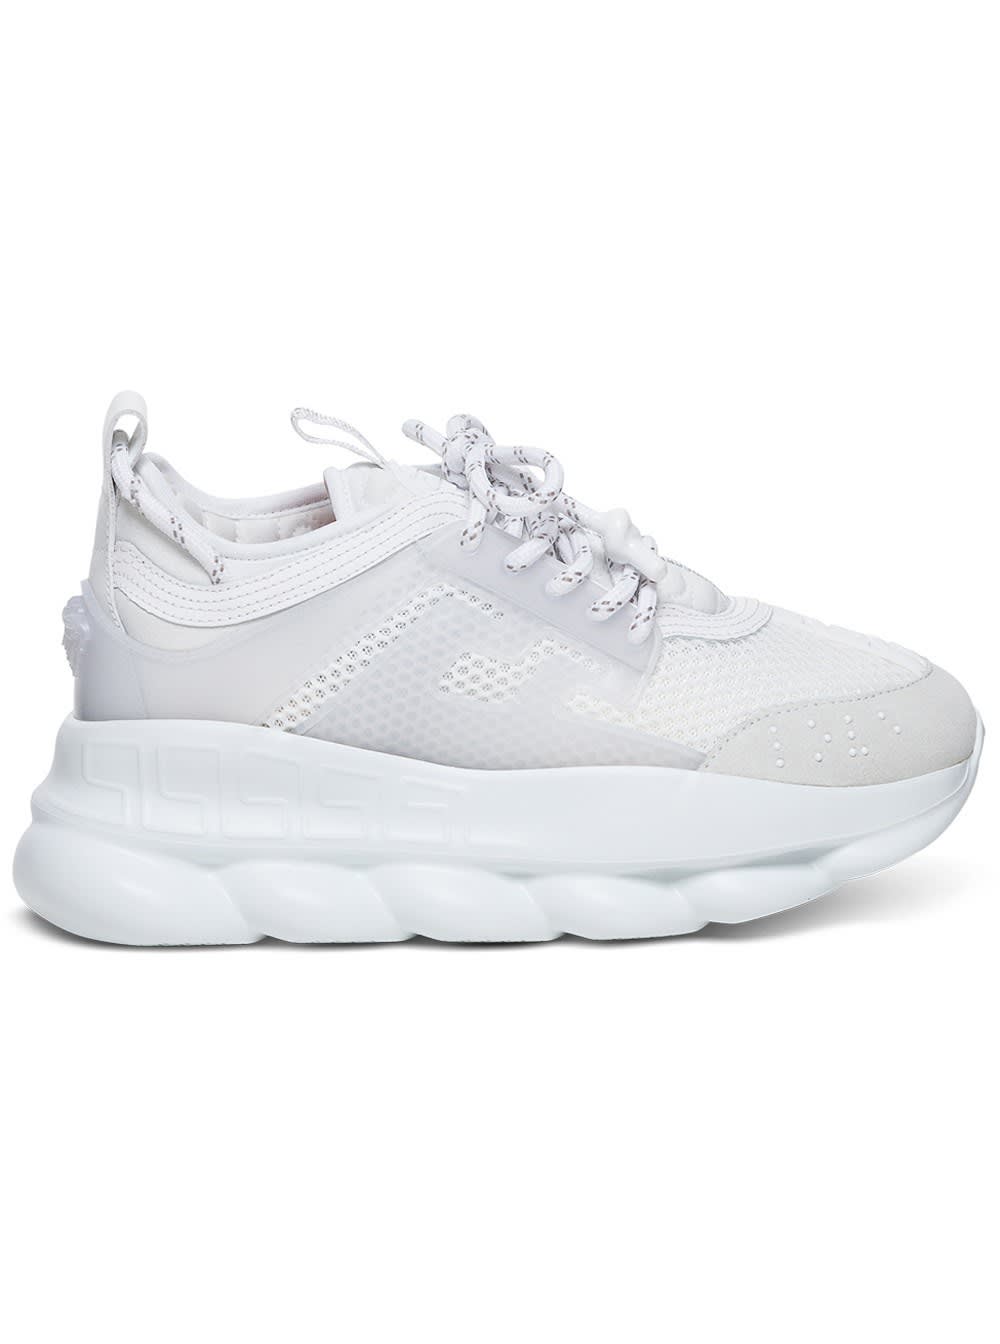 Buy Versace Chain Reaction Panelled Sneakers online, shop Versace shoes with free shipping